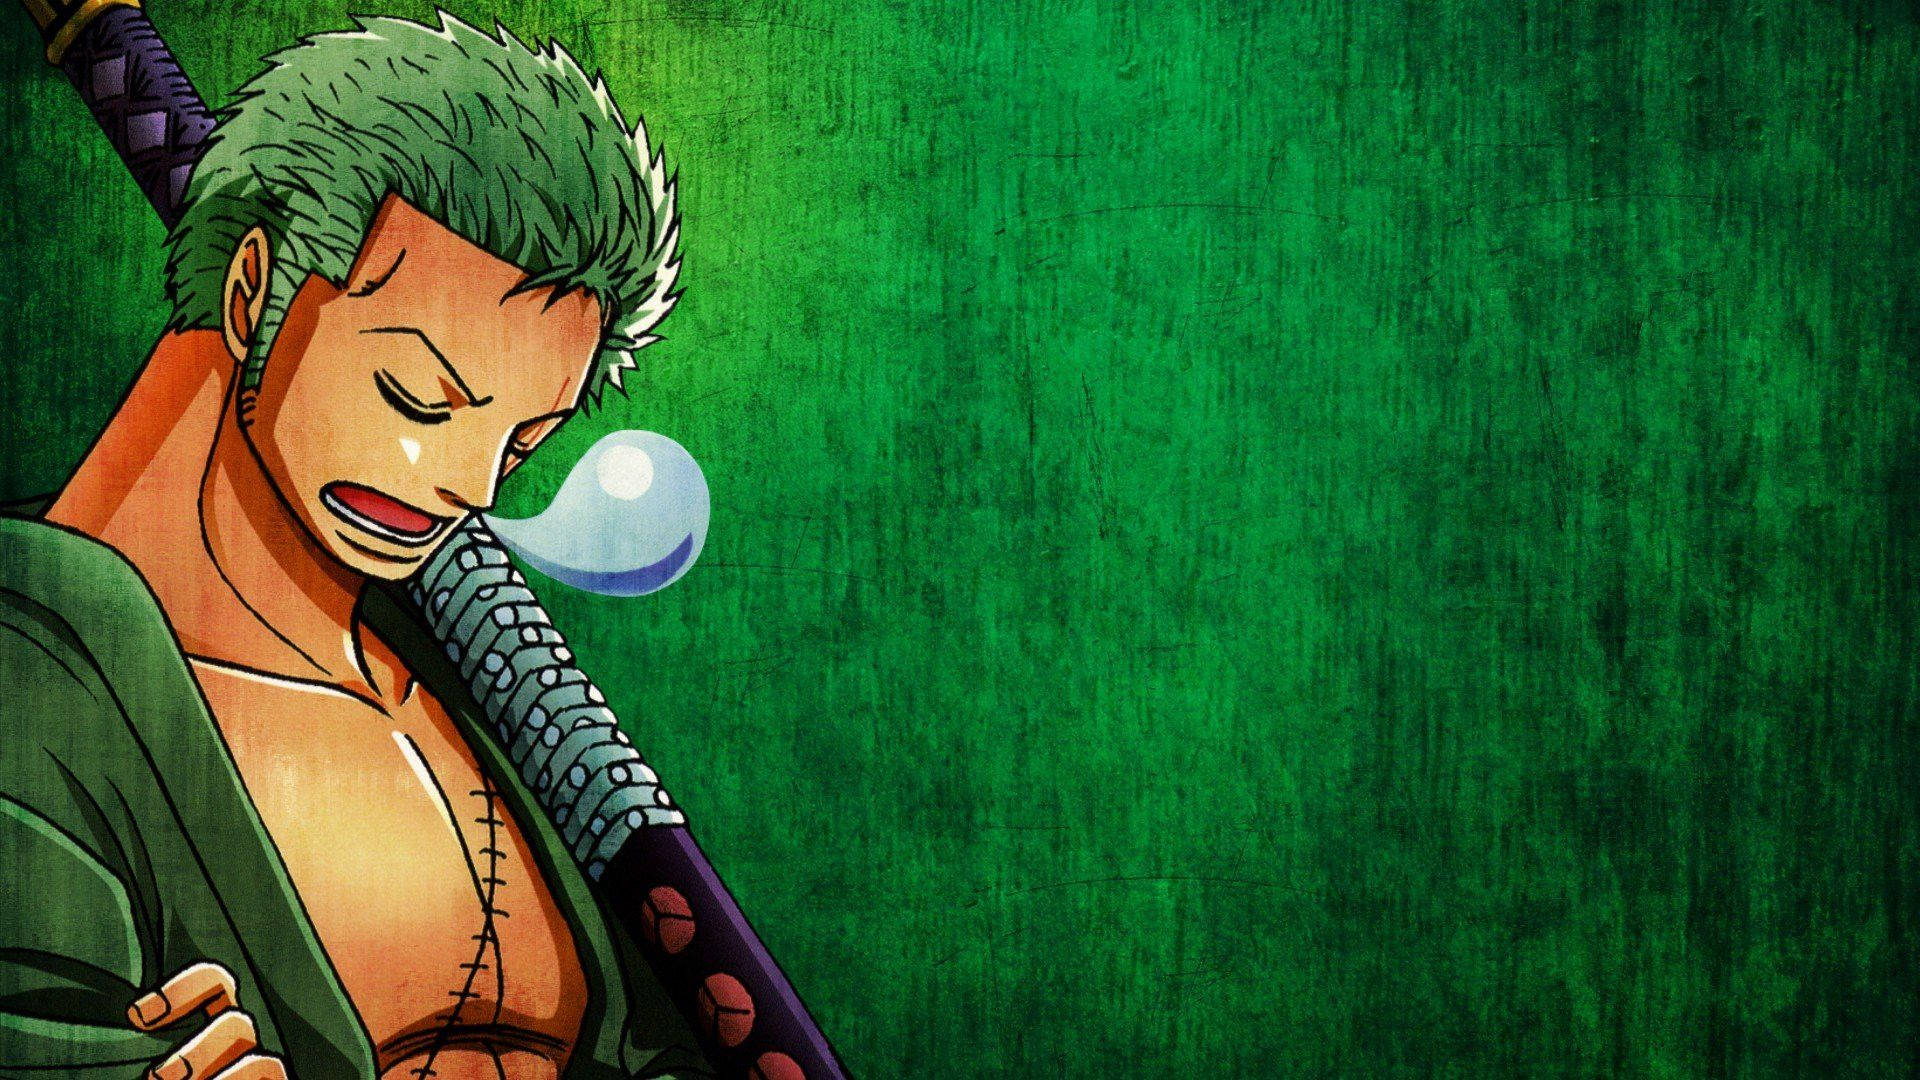 Zoro Dream – The One Behind The Iconic One Piece. Background